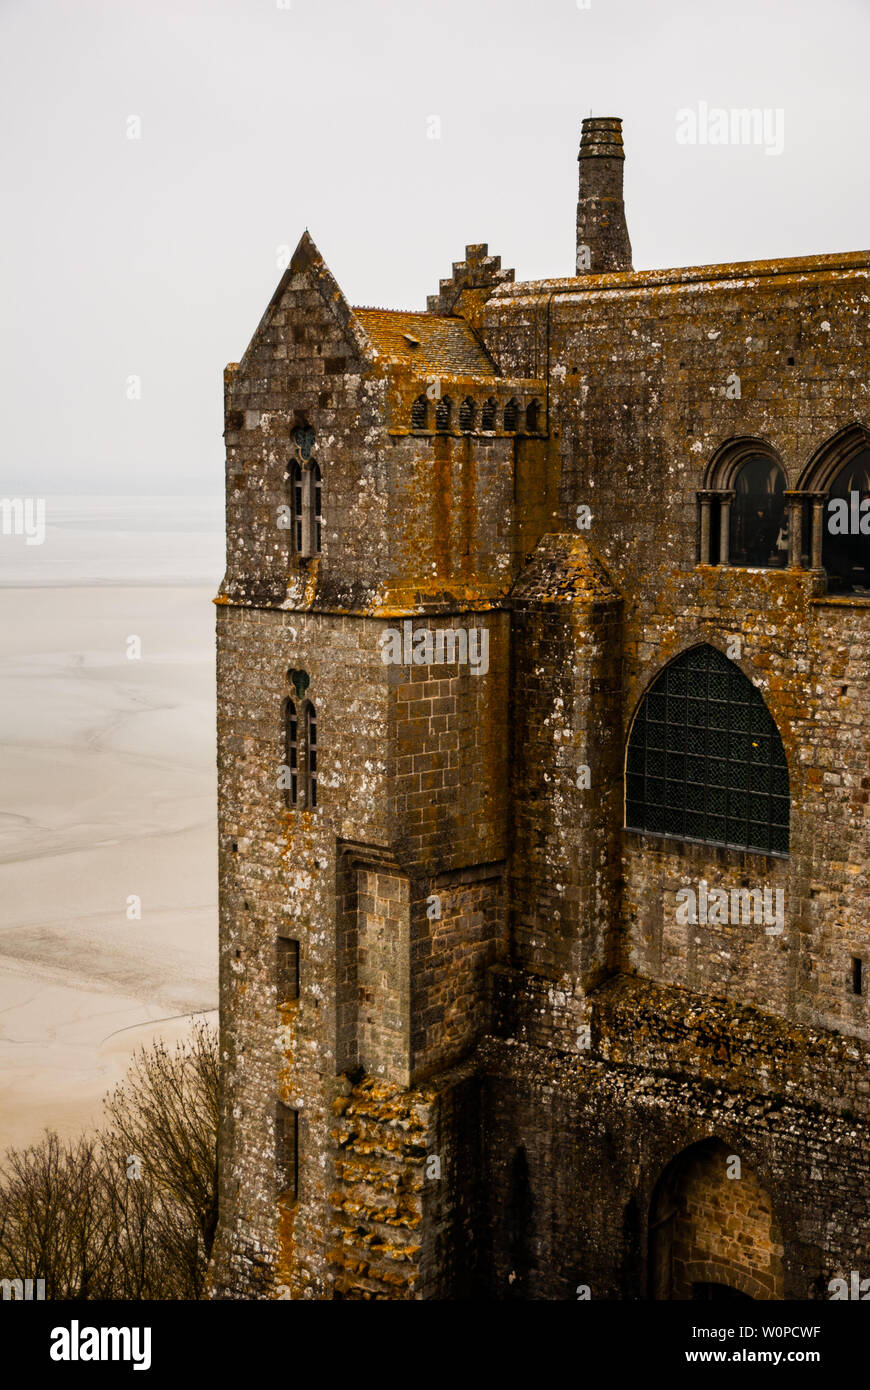 The Mont Saint Michel Abby in France Stock Photo